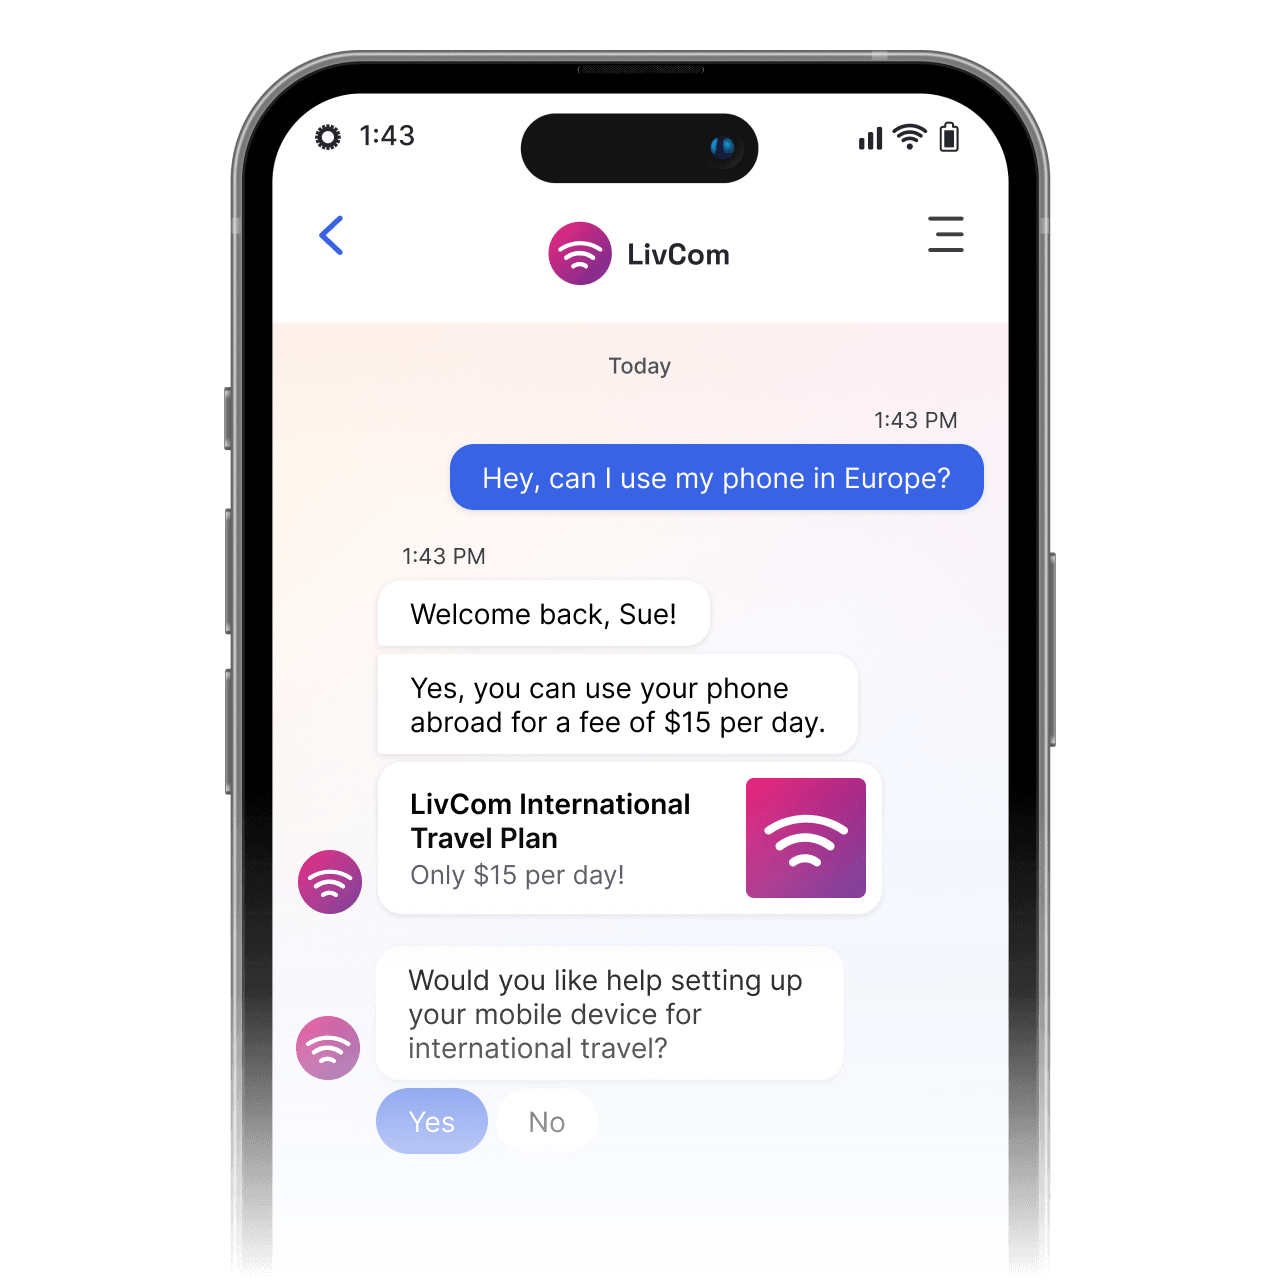 Using our Conversational AI platform enables telecom companies to quickly answer questions like if phones can be used while traveling